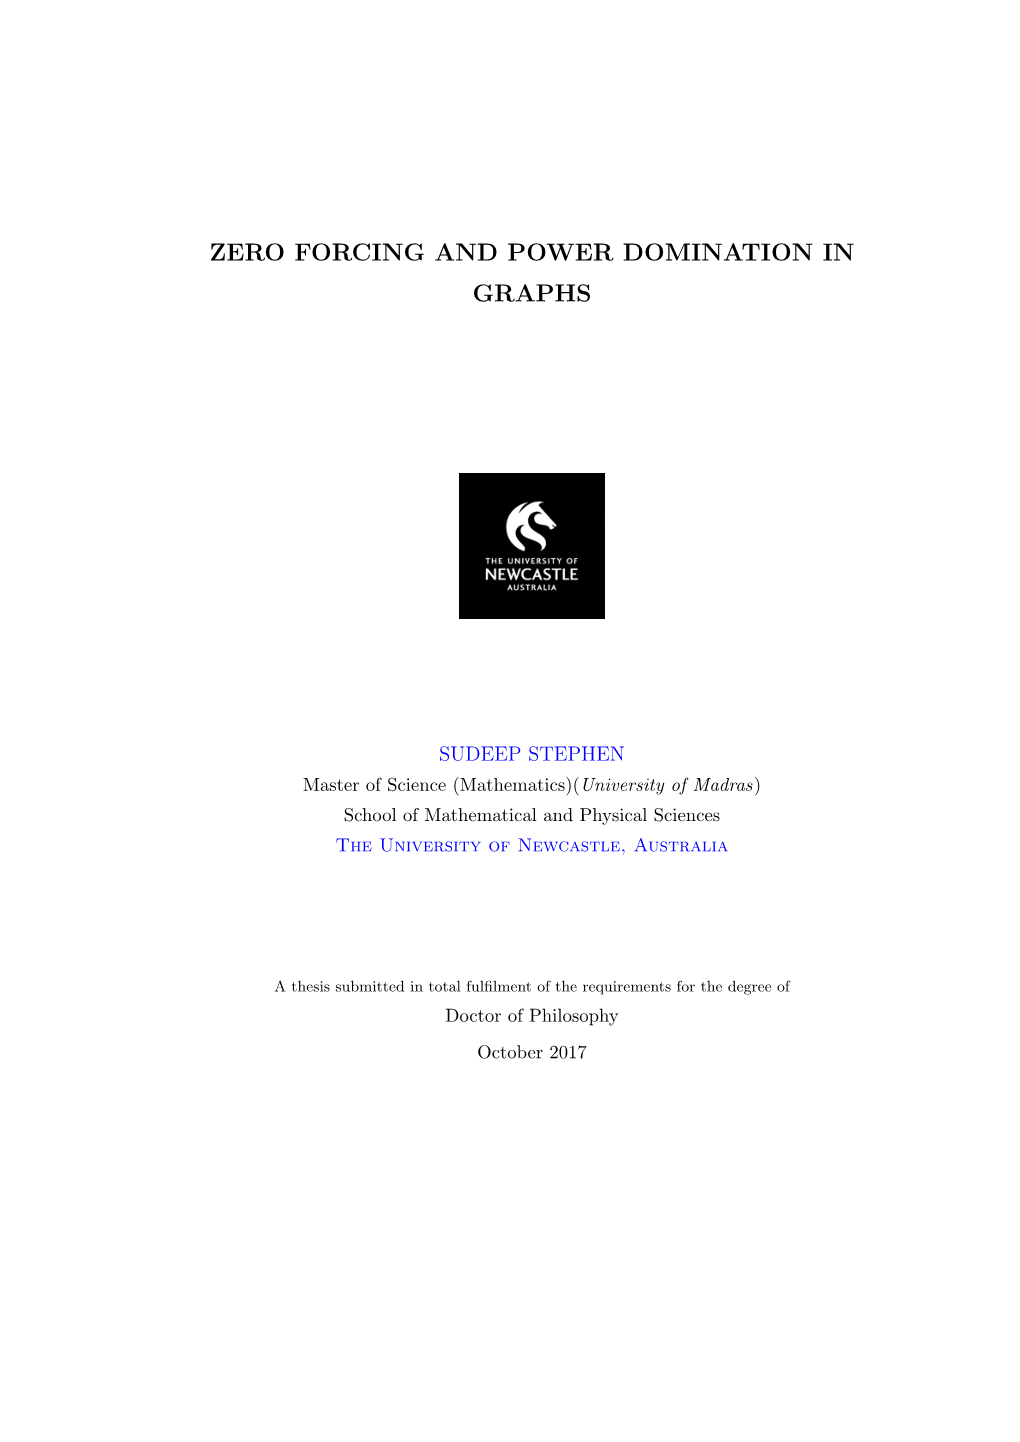 Zero Forcing and Power Domination in Graphs